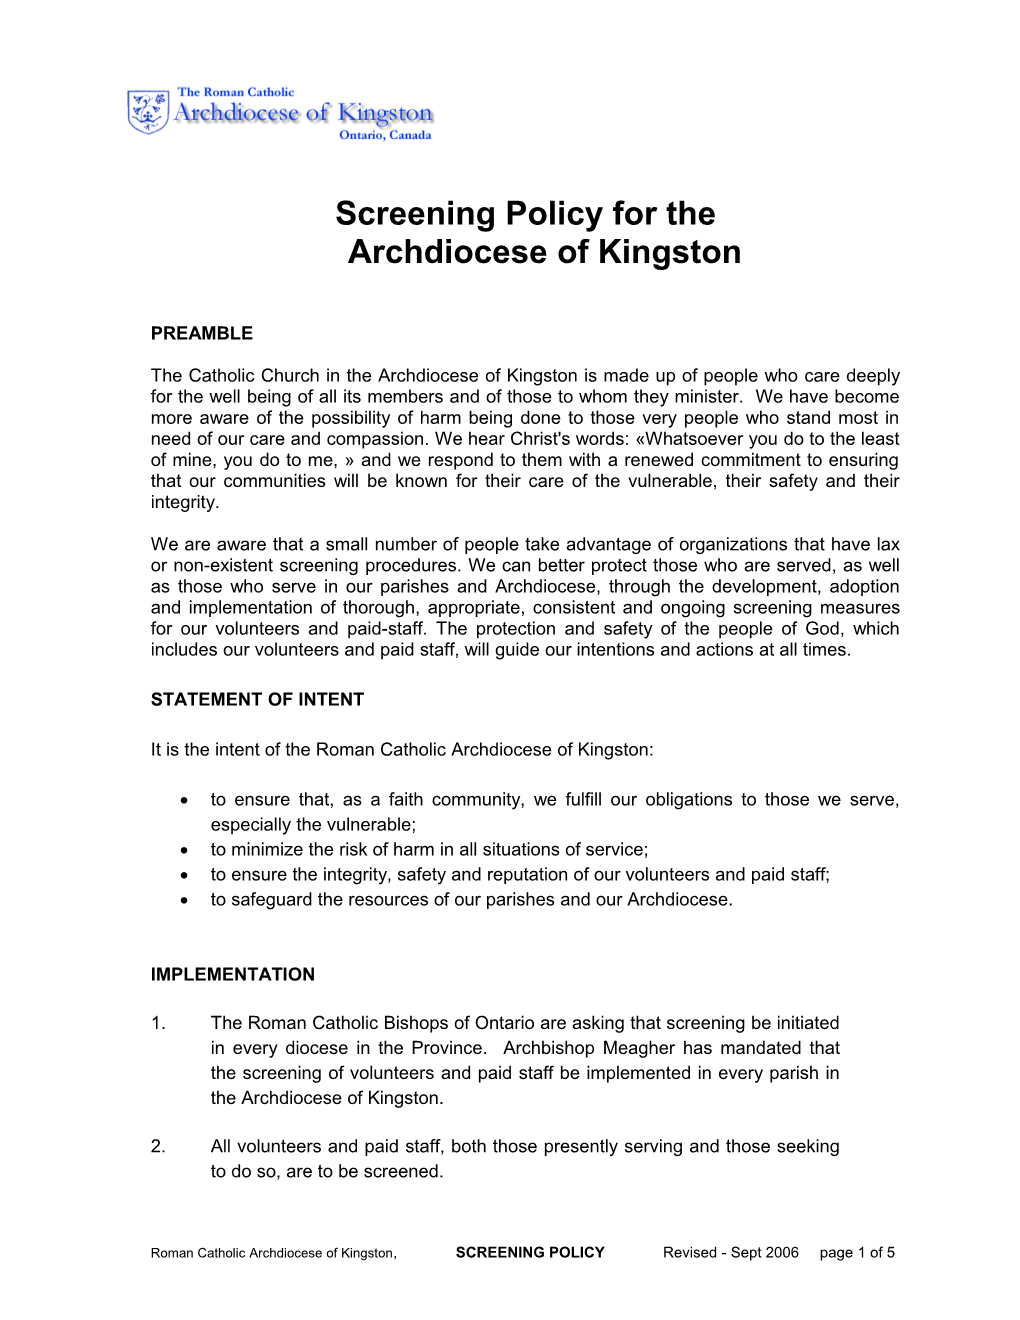 Screening Policy for The